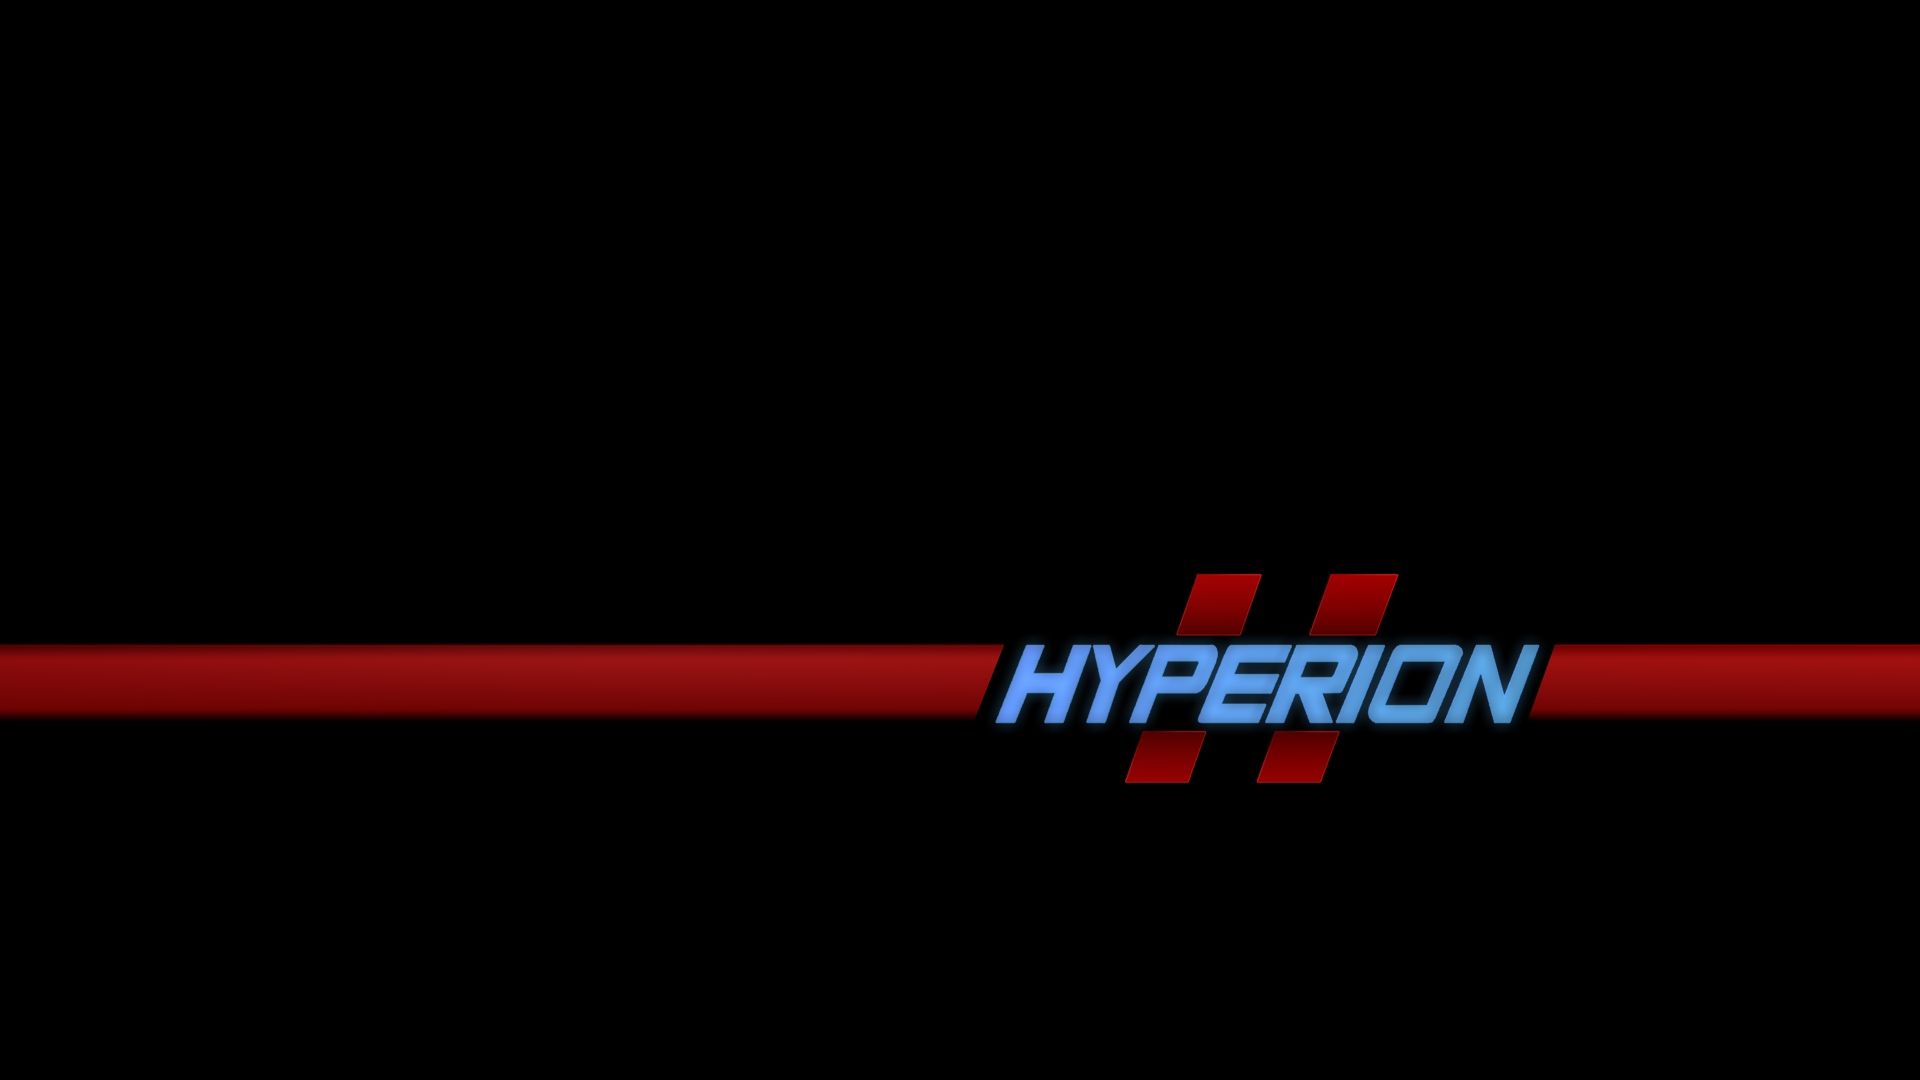 Hyperion Wallpaper Image Group